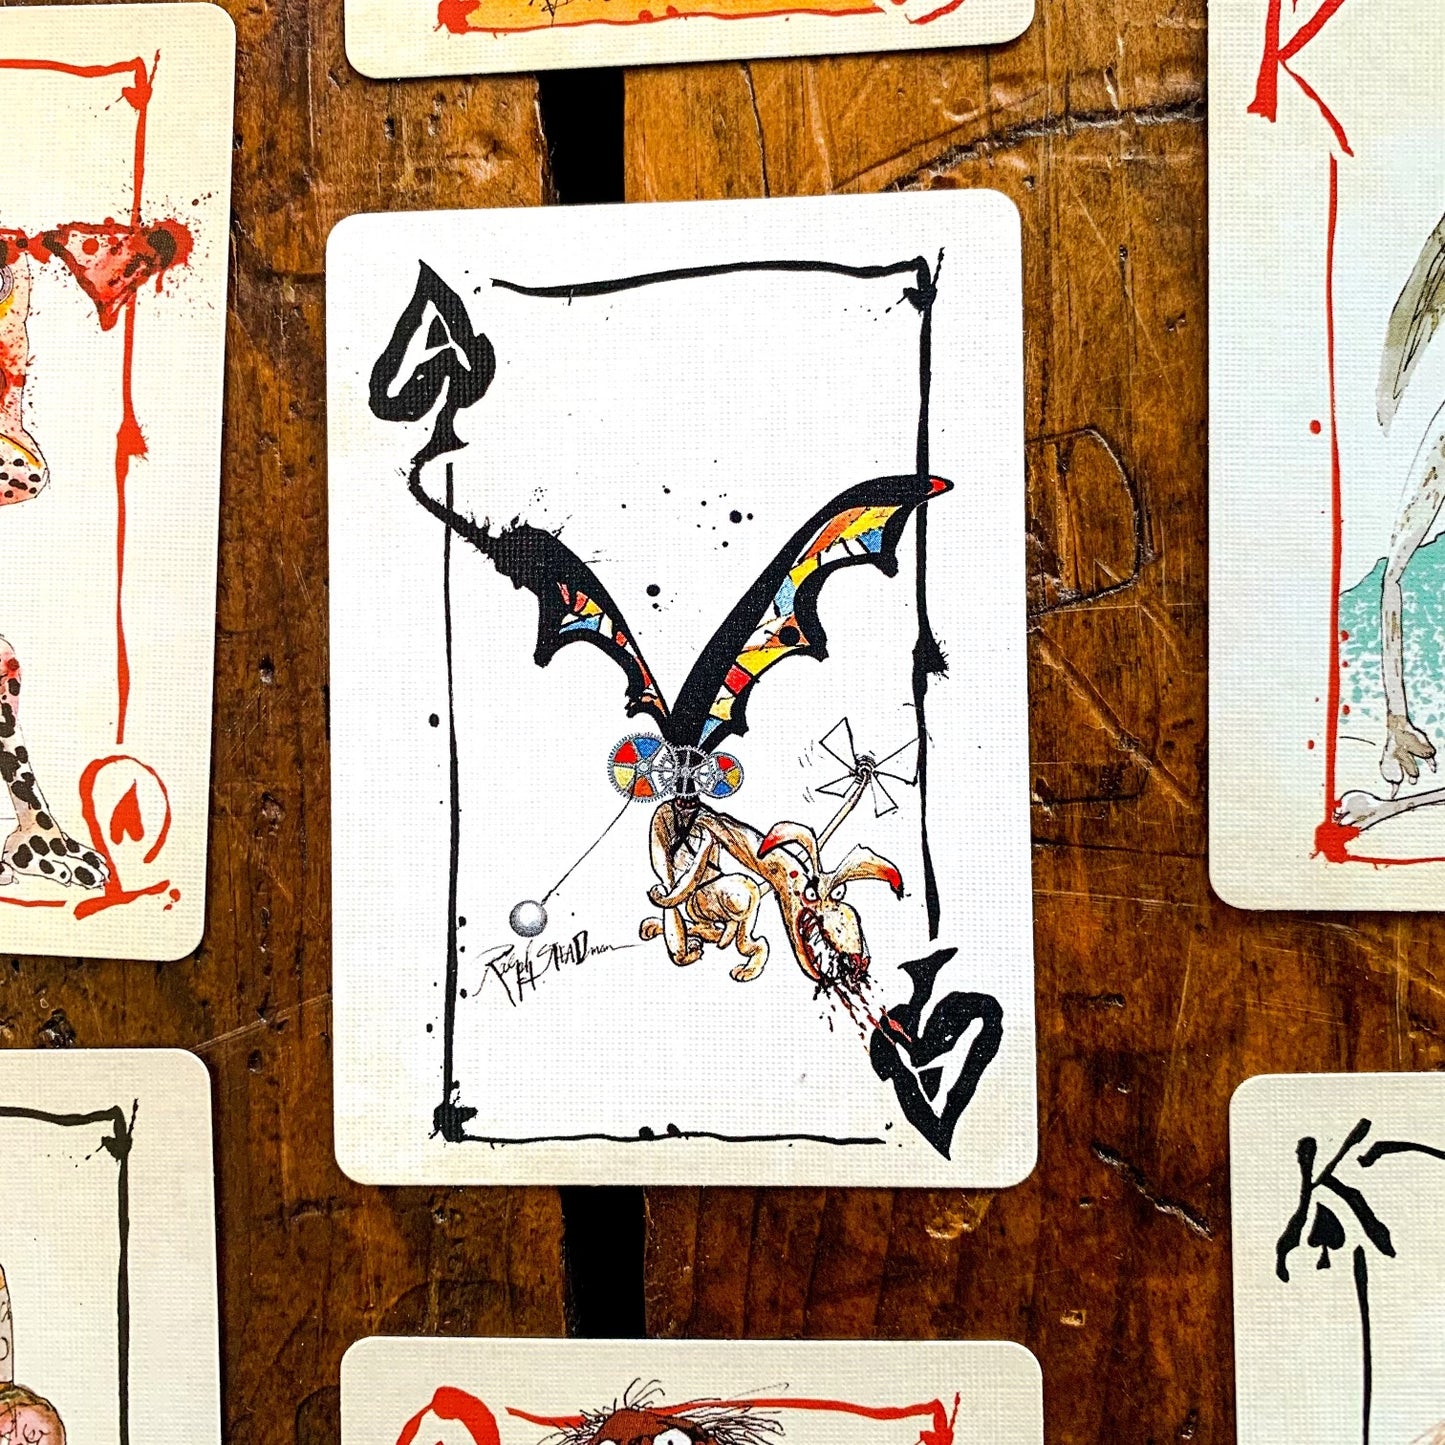 Flying Dog Brewery Logo as seen on Ace of Spaced playing card; illustrated by Ralph Steadman